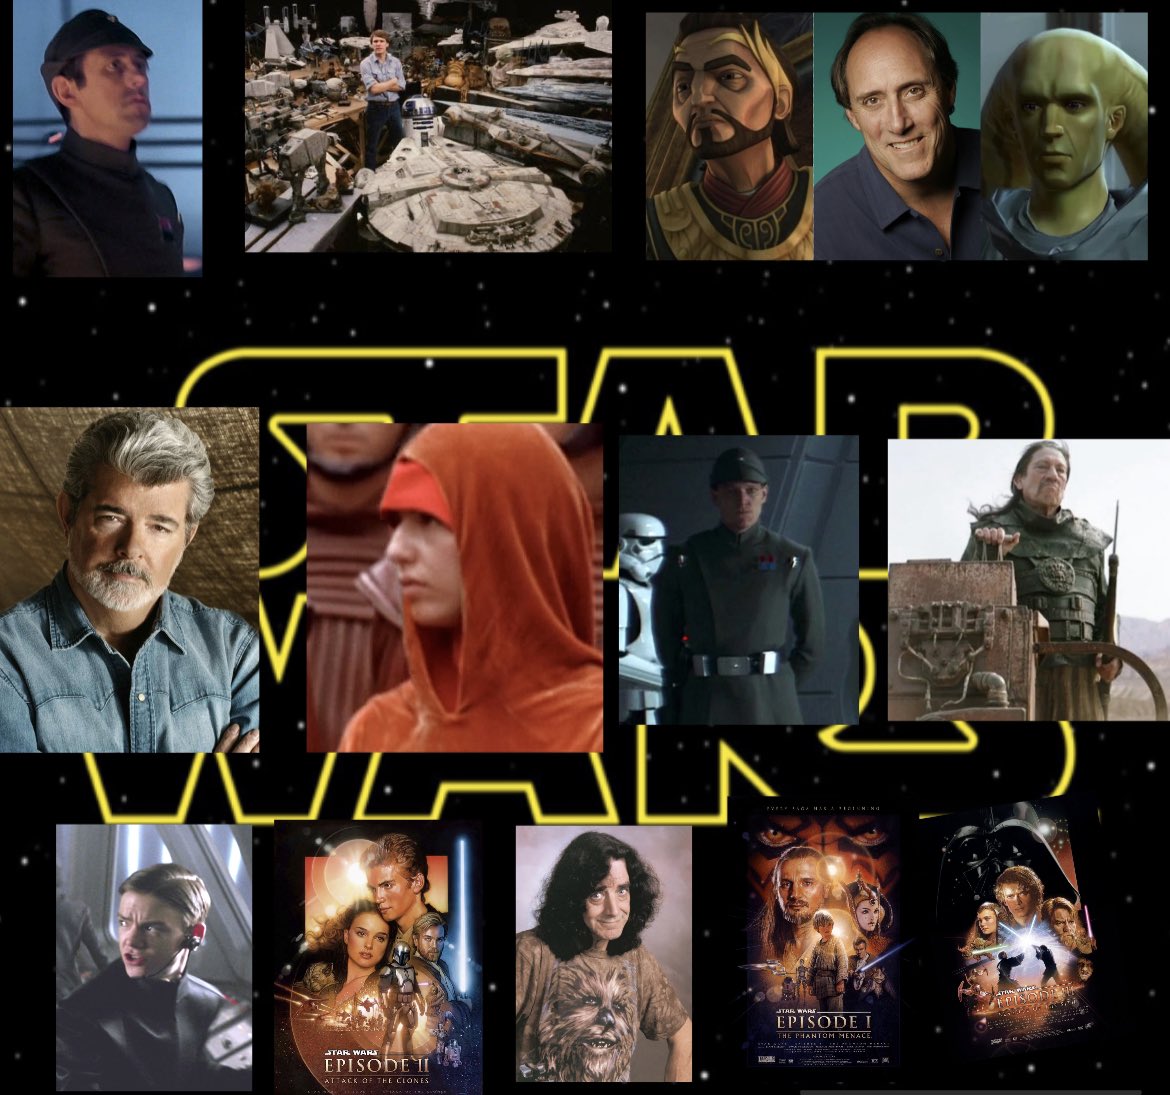 #SS May 13 Milton Johns, Joe Johnston, Kirk Thornton; May 14 George Lucas, Sofia Coppola, Gabriel Ebert; May 16 Danny Trejo, Thomas Brodie-Sangster, “Episode II - Attack Of The Clones”; May 19 Peter Mayhew, “The Phantom Menace”, “Revenge Of The Sith”
@starwars https://t.co/gOBl53ywYJ